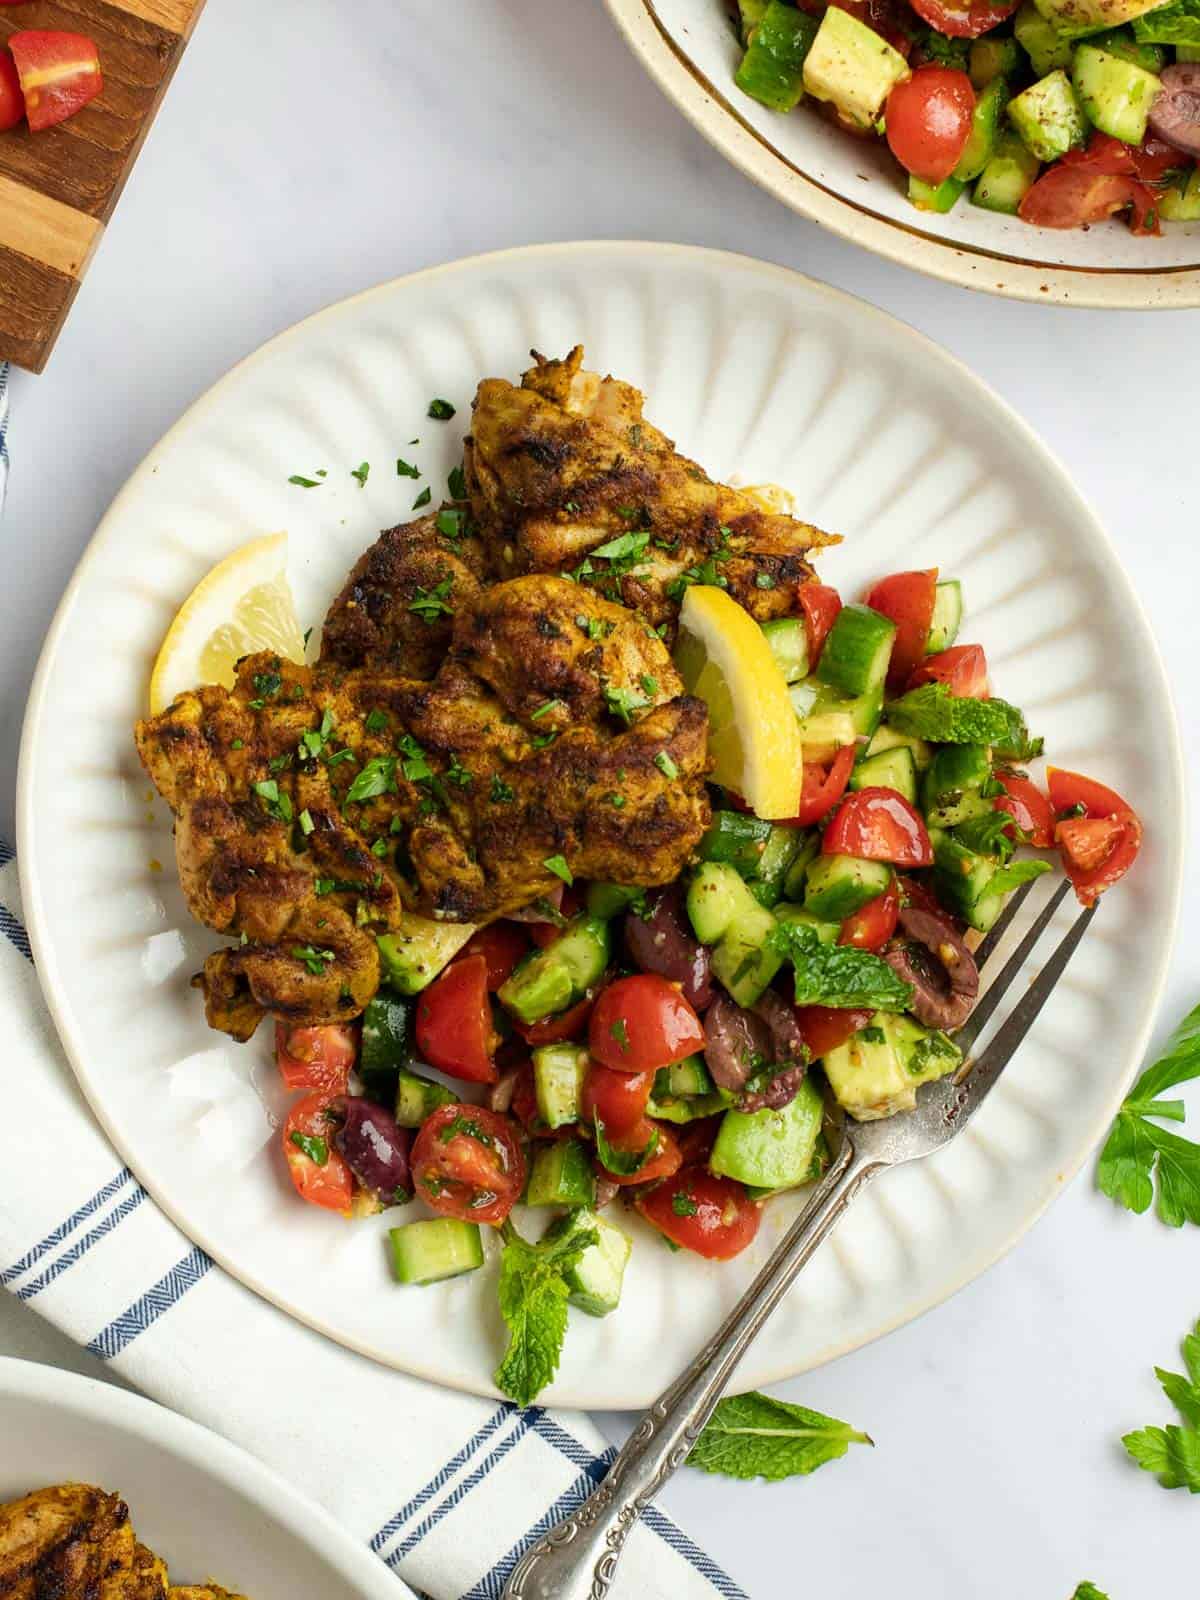 Mediterranean grilled chicken thighs on a plate with cucumber and tomato salad.